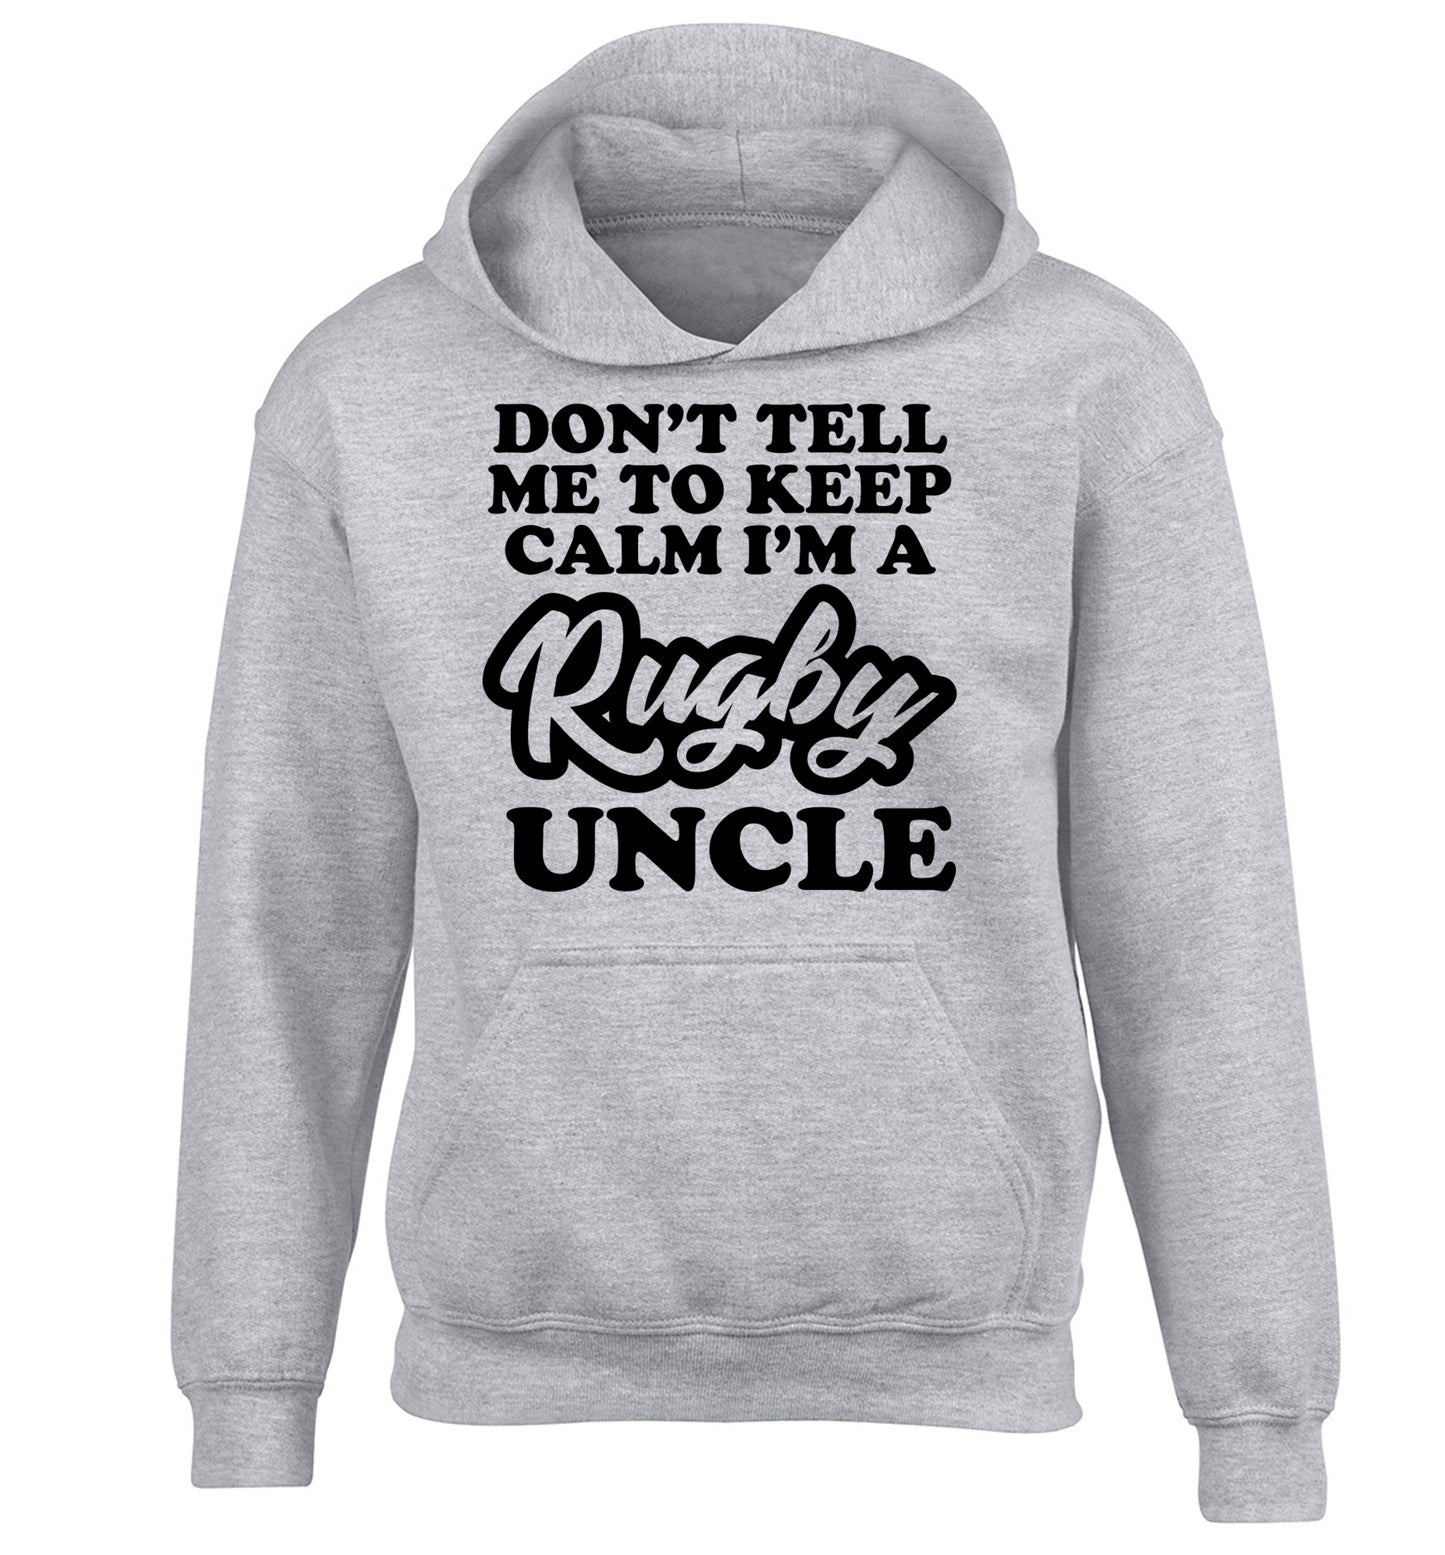 Don't tell me to keep calm I'm a rugby uncle children's grey hoodie 12-13 Years